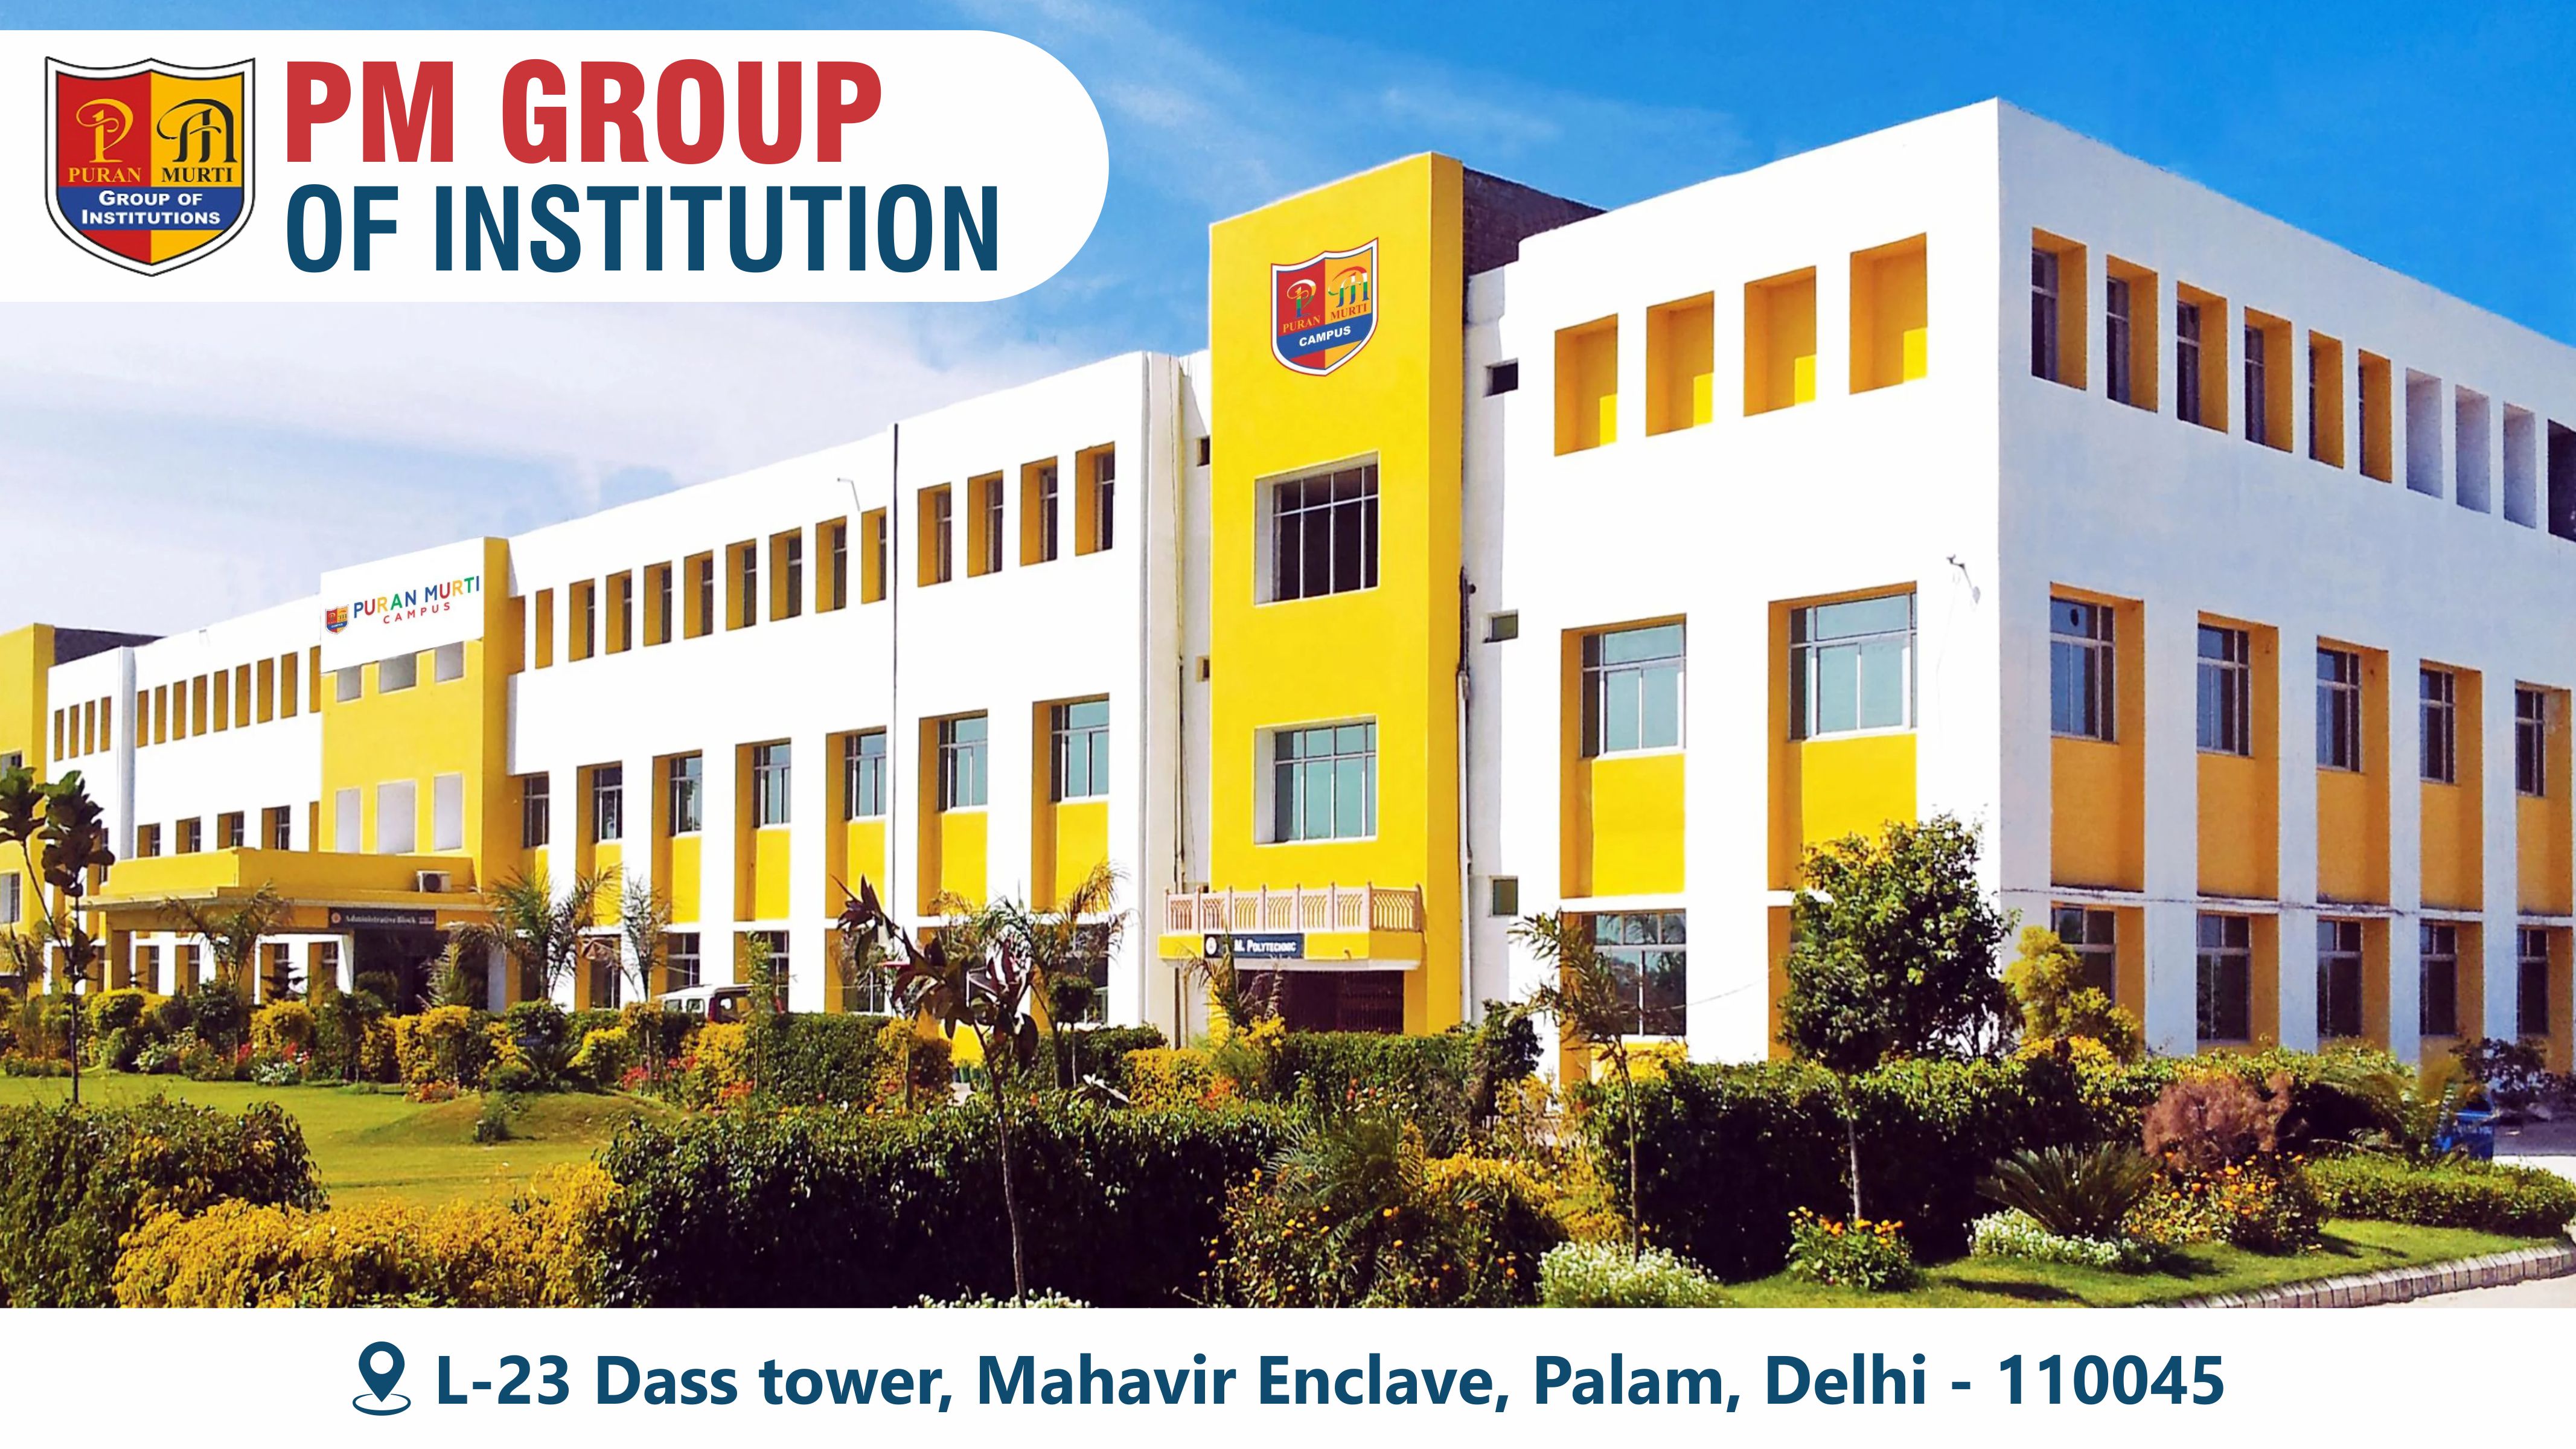 out side view of PM GROUP OF INSTITUTION